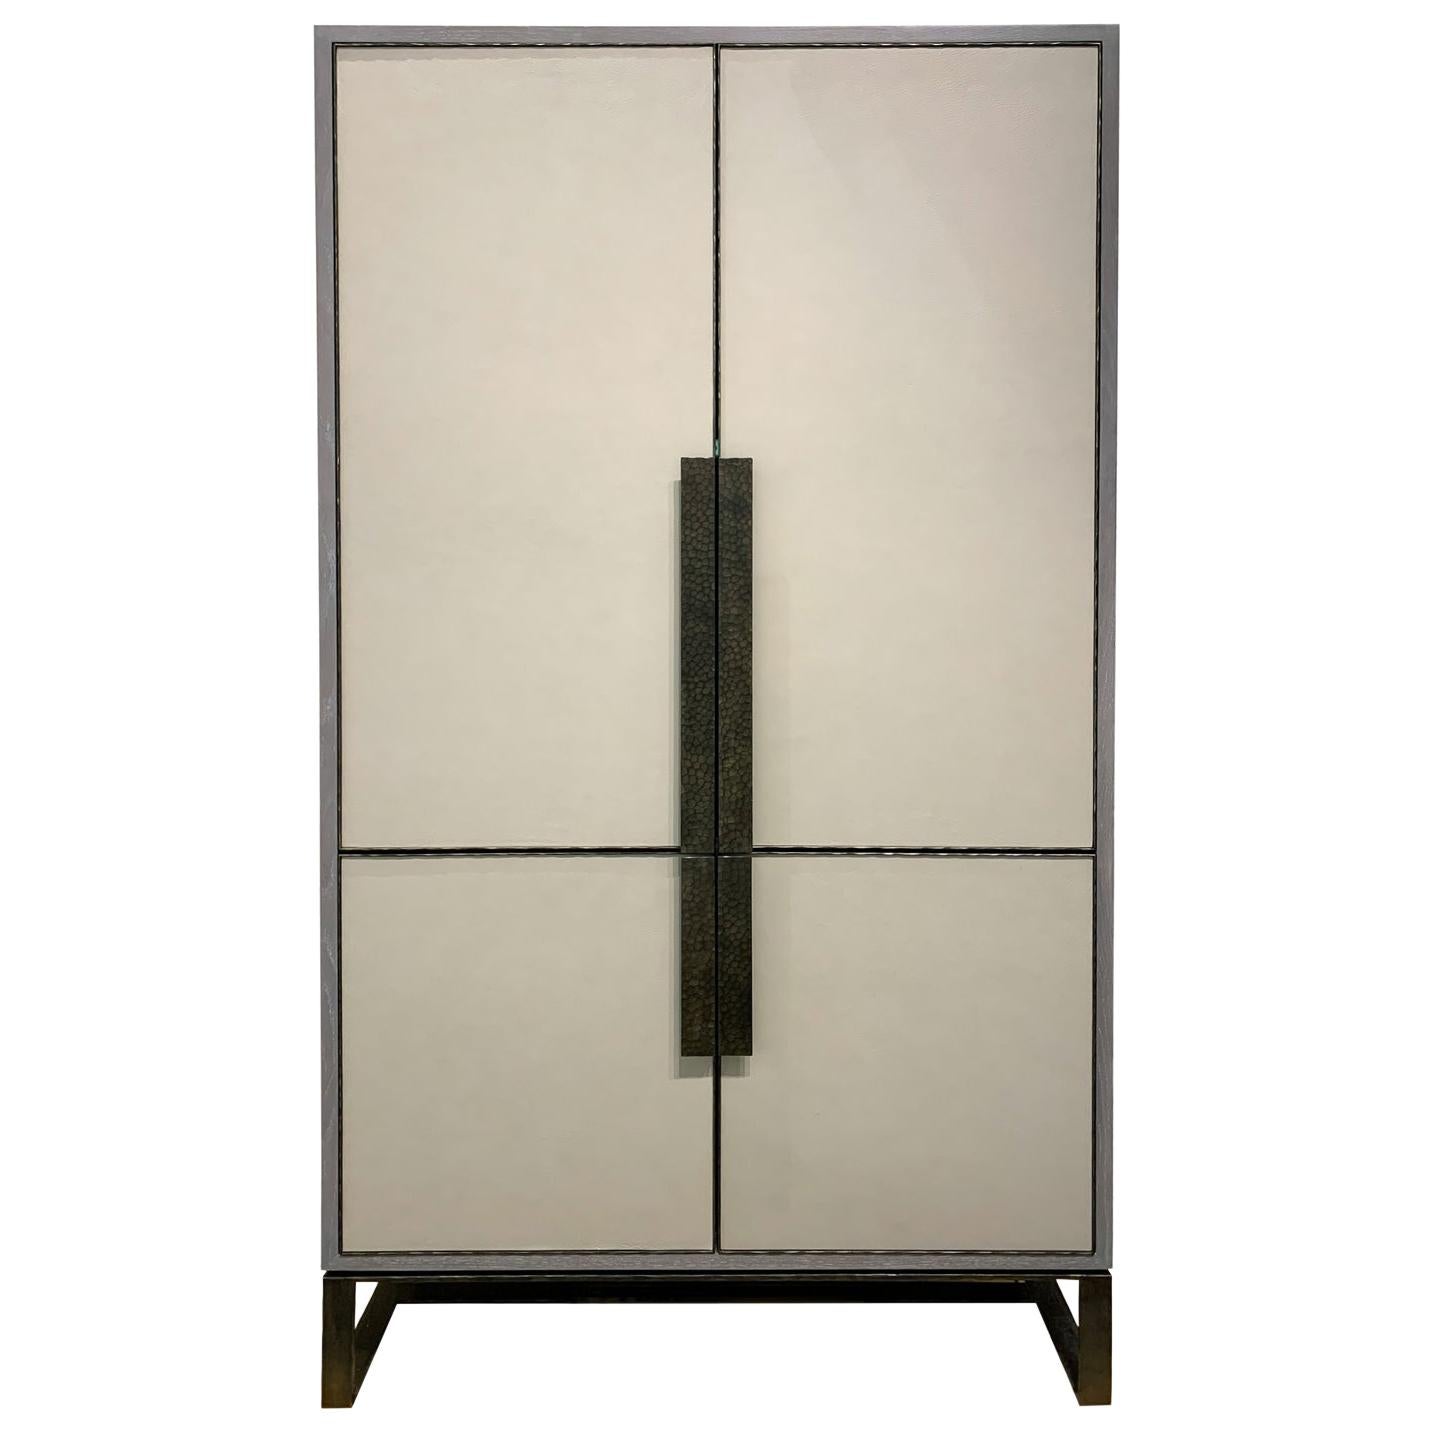 Customizable Chelsea Gray Leather Pocket Door Bar with Hammered Base by Ercole 